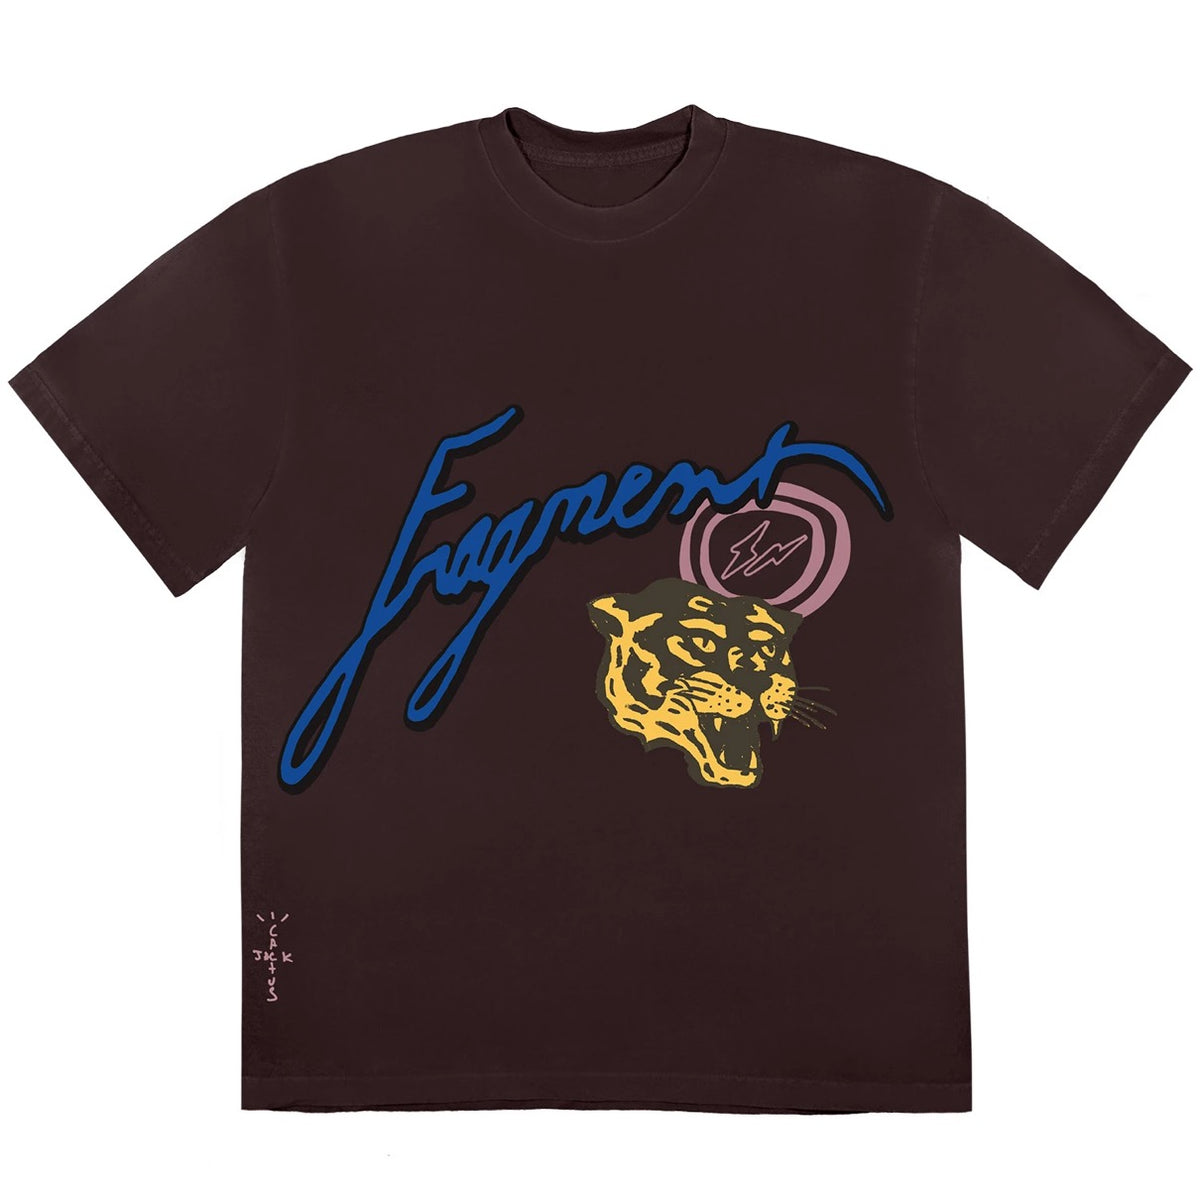 Size and Fit: Cactus Jack x Fragment Manifest Tee + CC Crossover